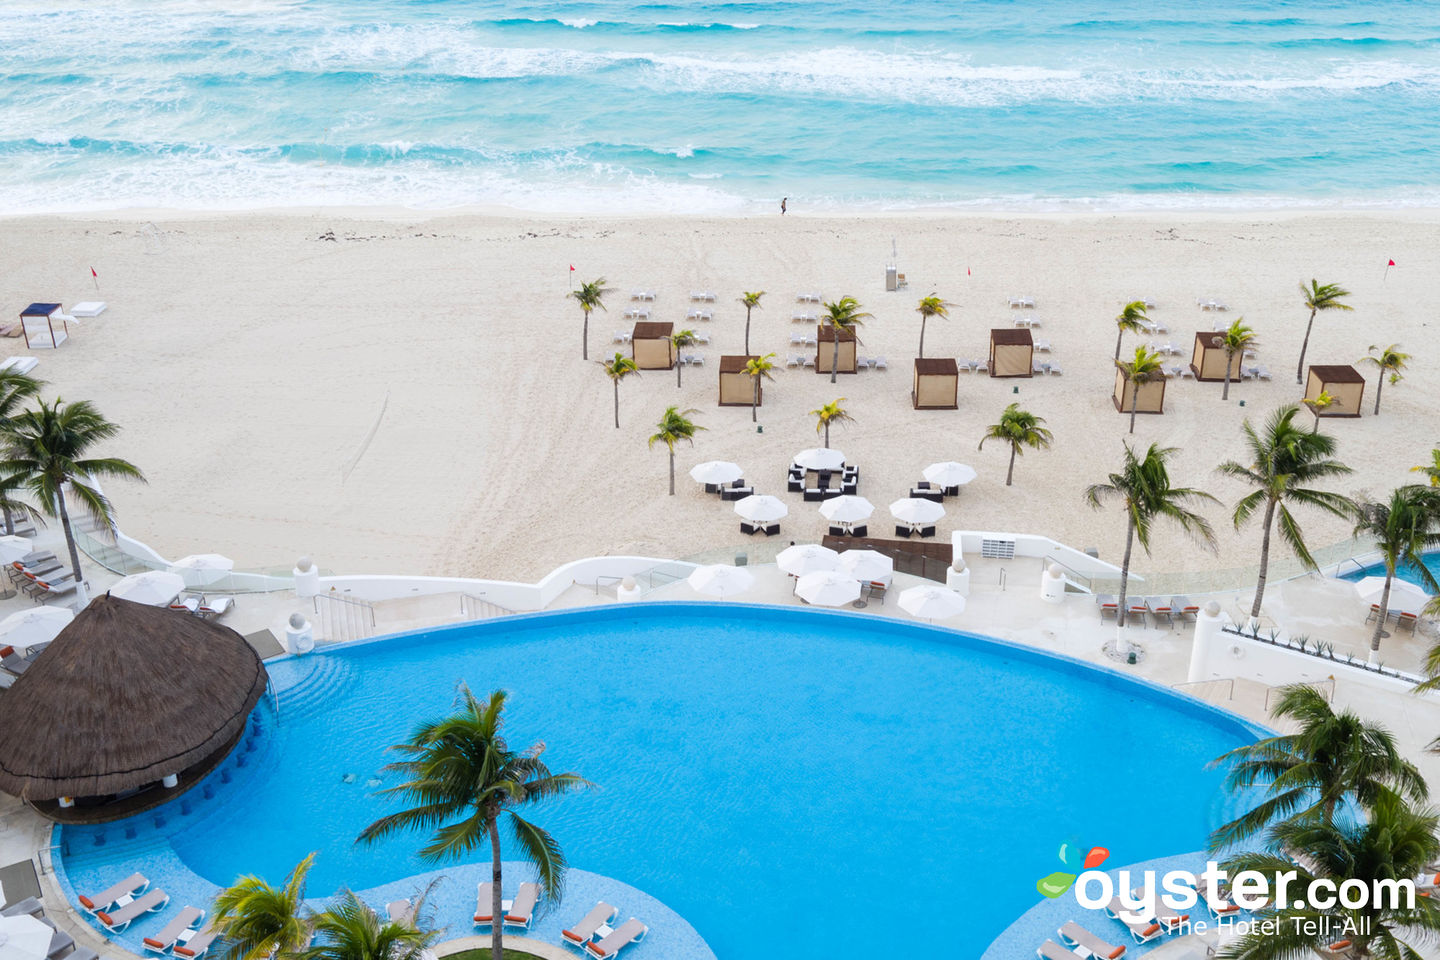 The 15 Best Adults-Only Luxury Resorts in Mexico